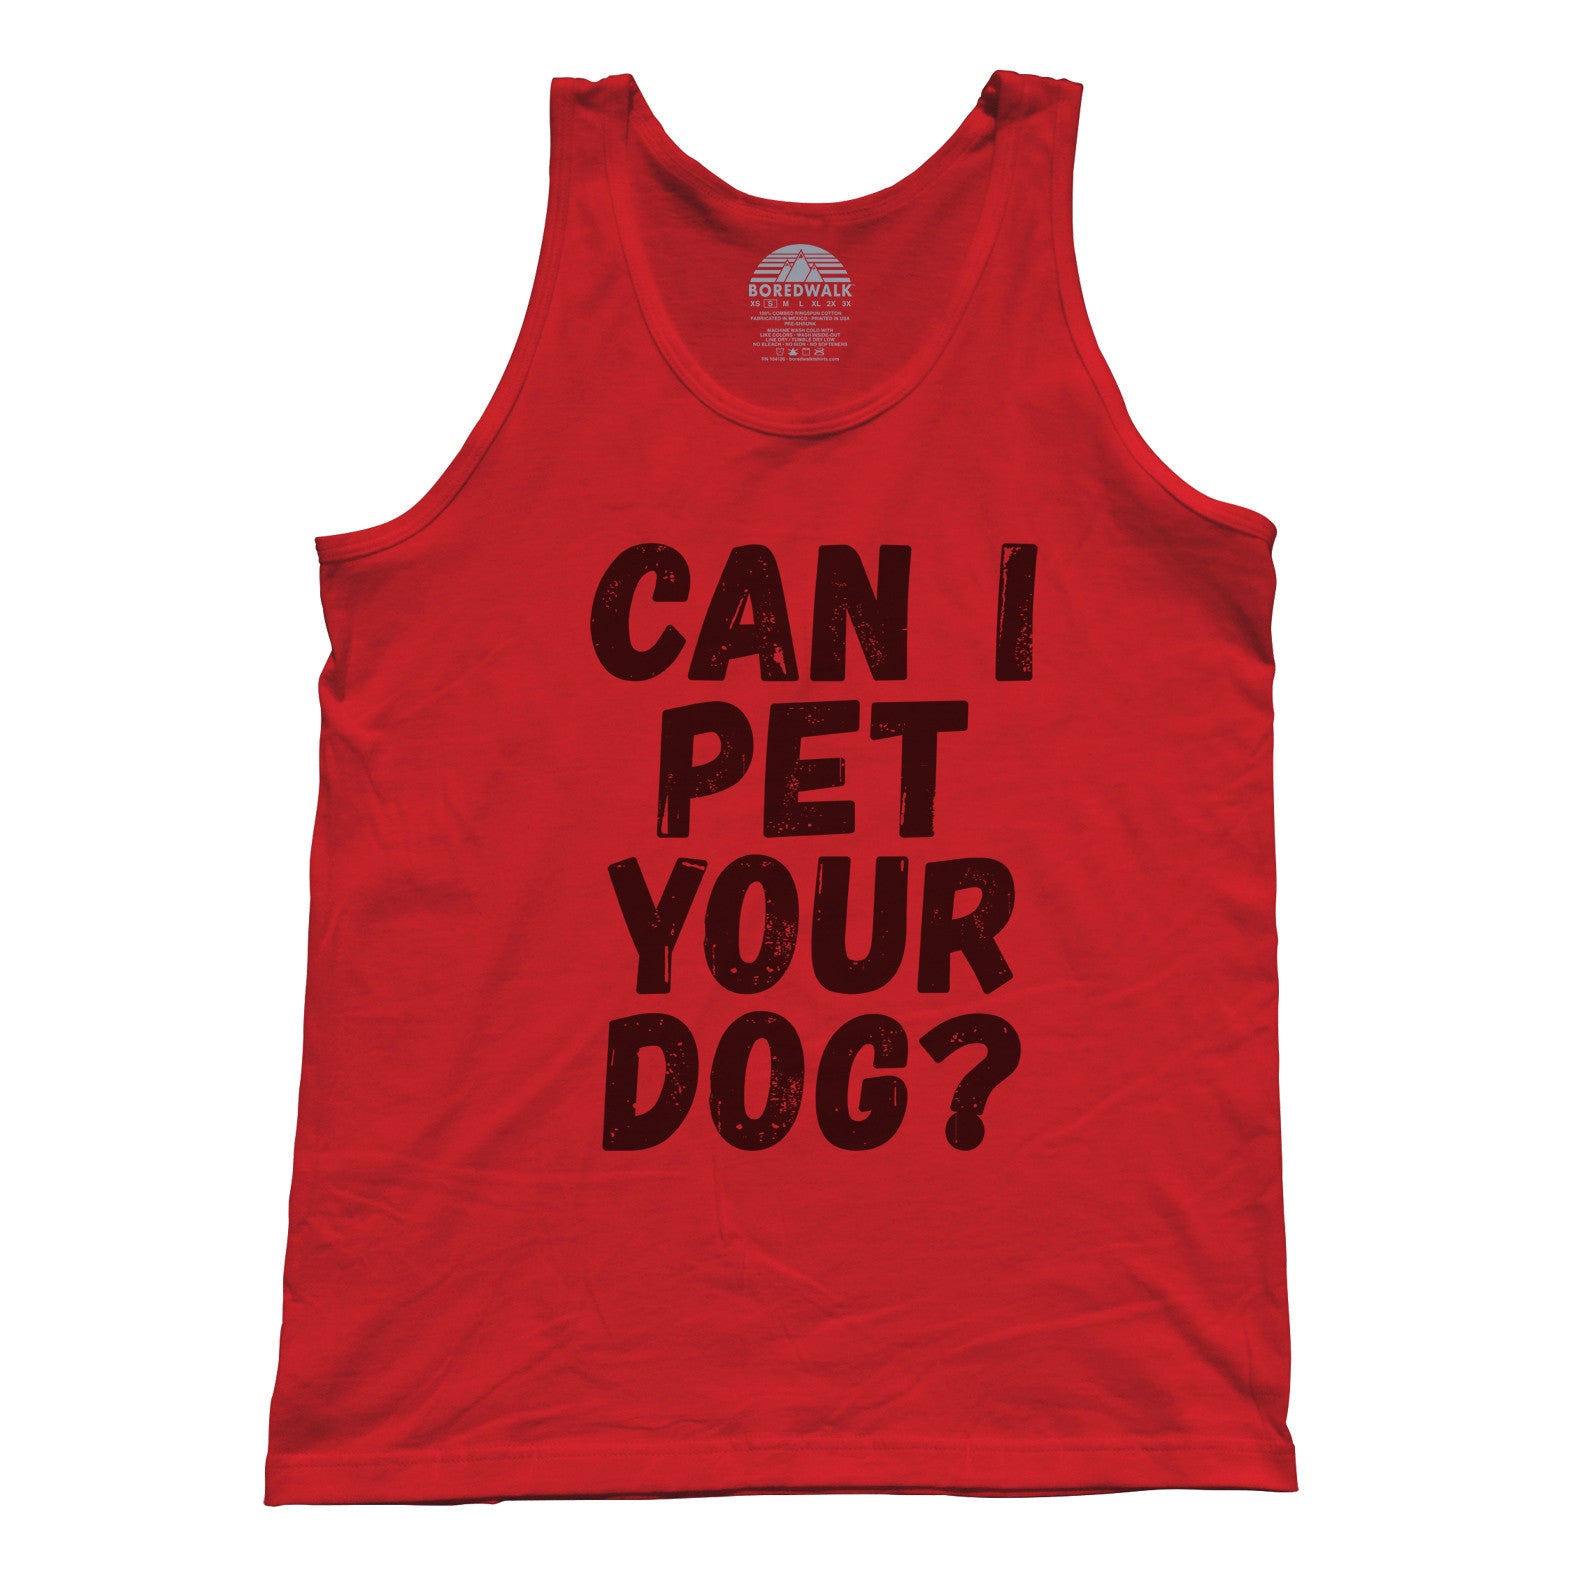 Unisex Can I Pet Your Dog Tank Top - Funny Dog Lover Shirt